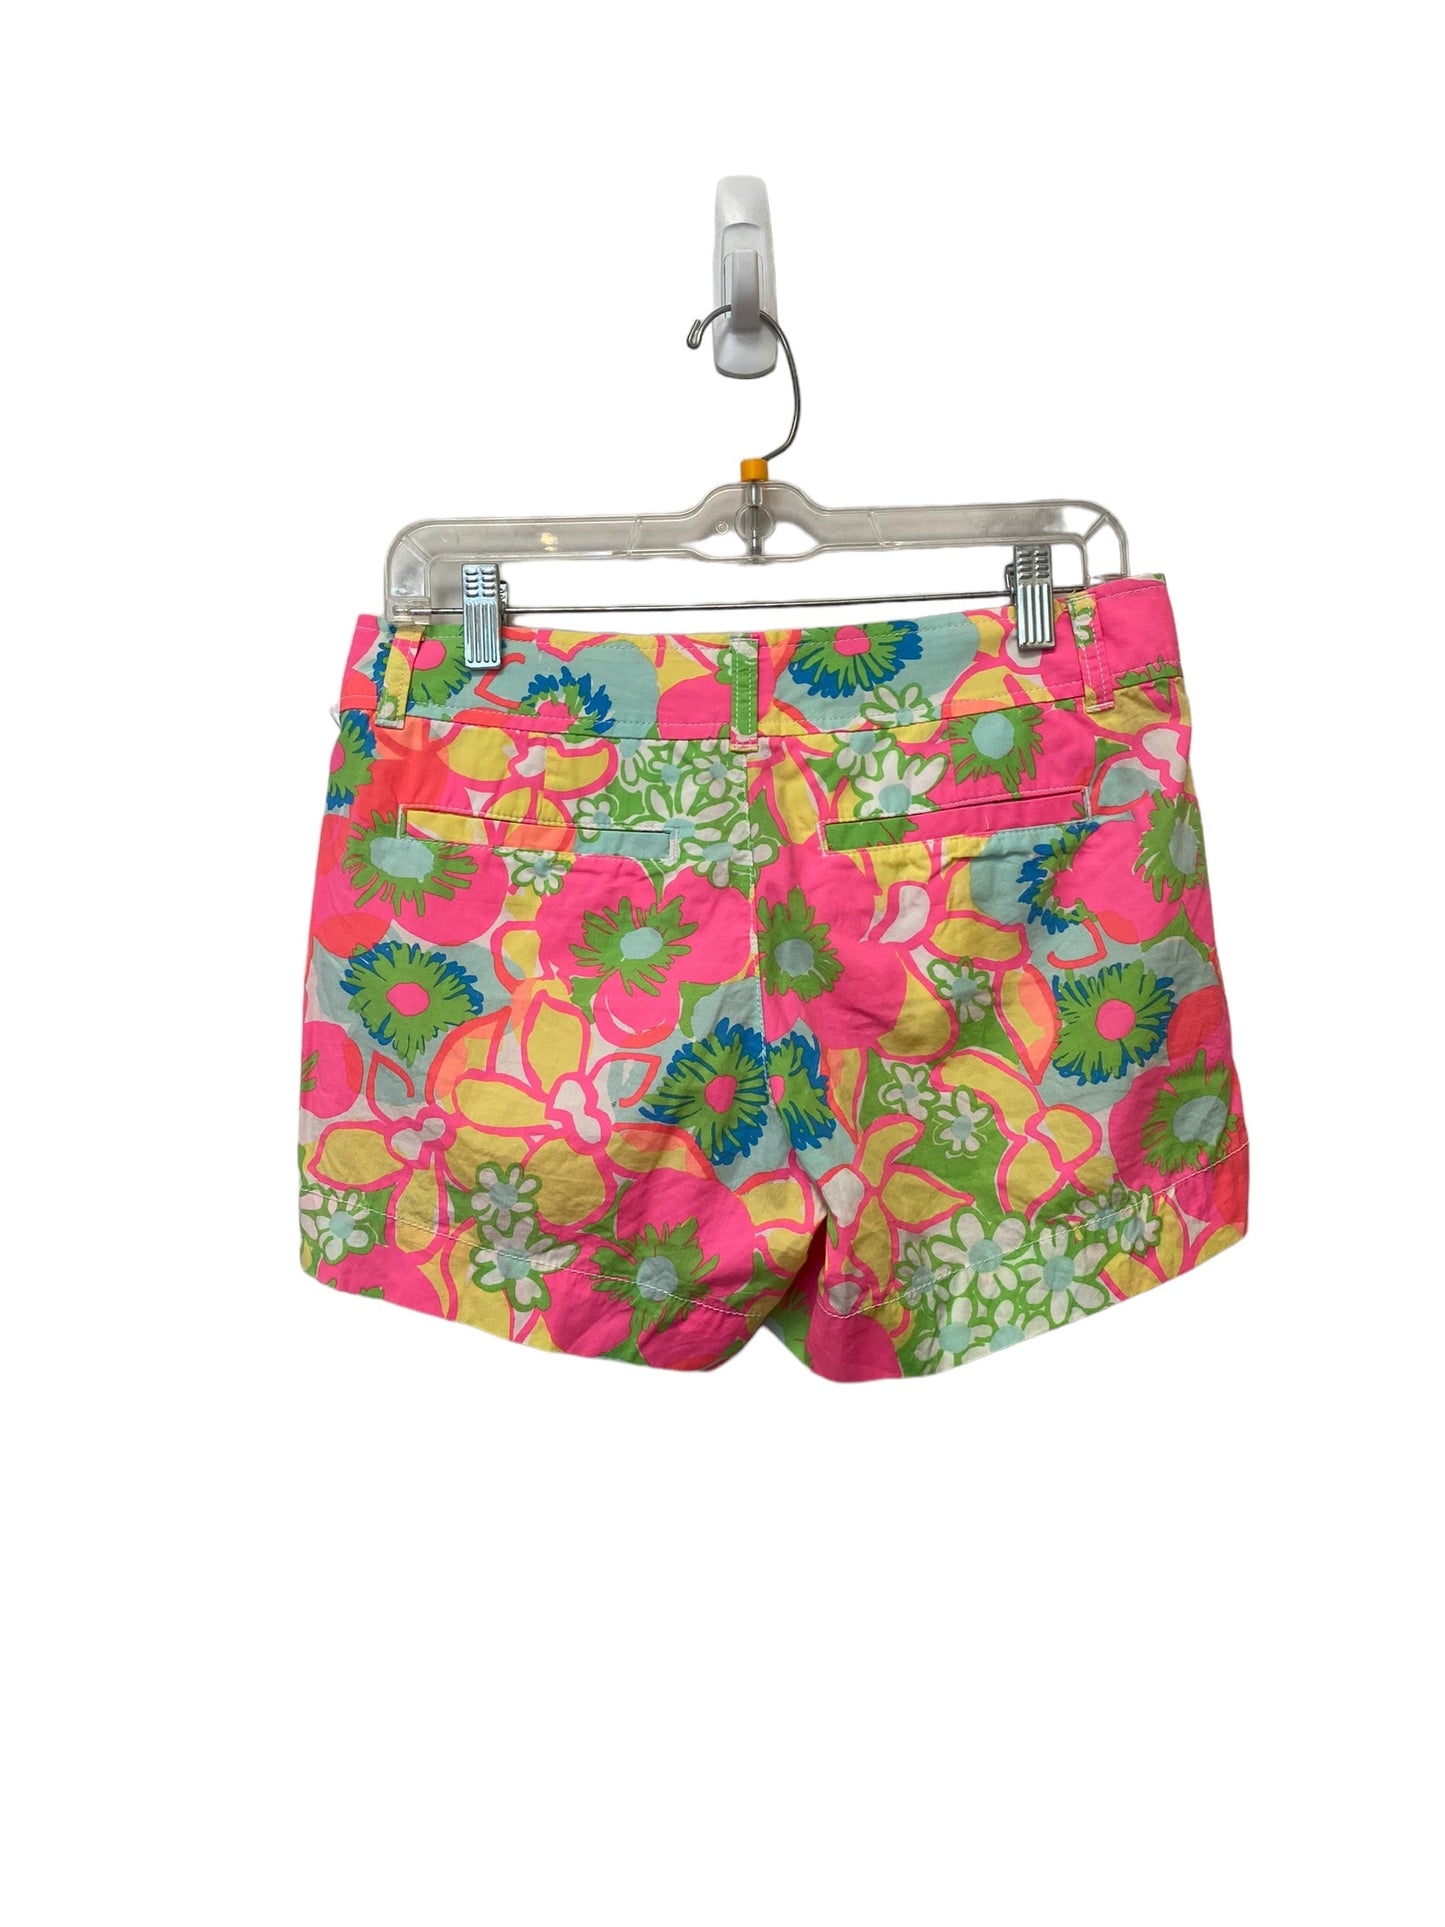 Floral Print Shorts Lilly Pulitzer, Size 2